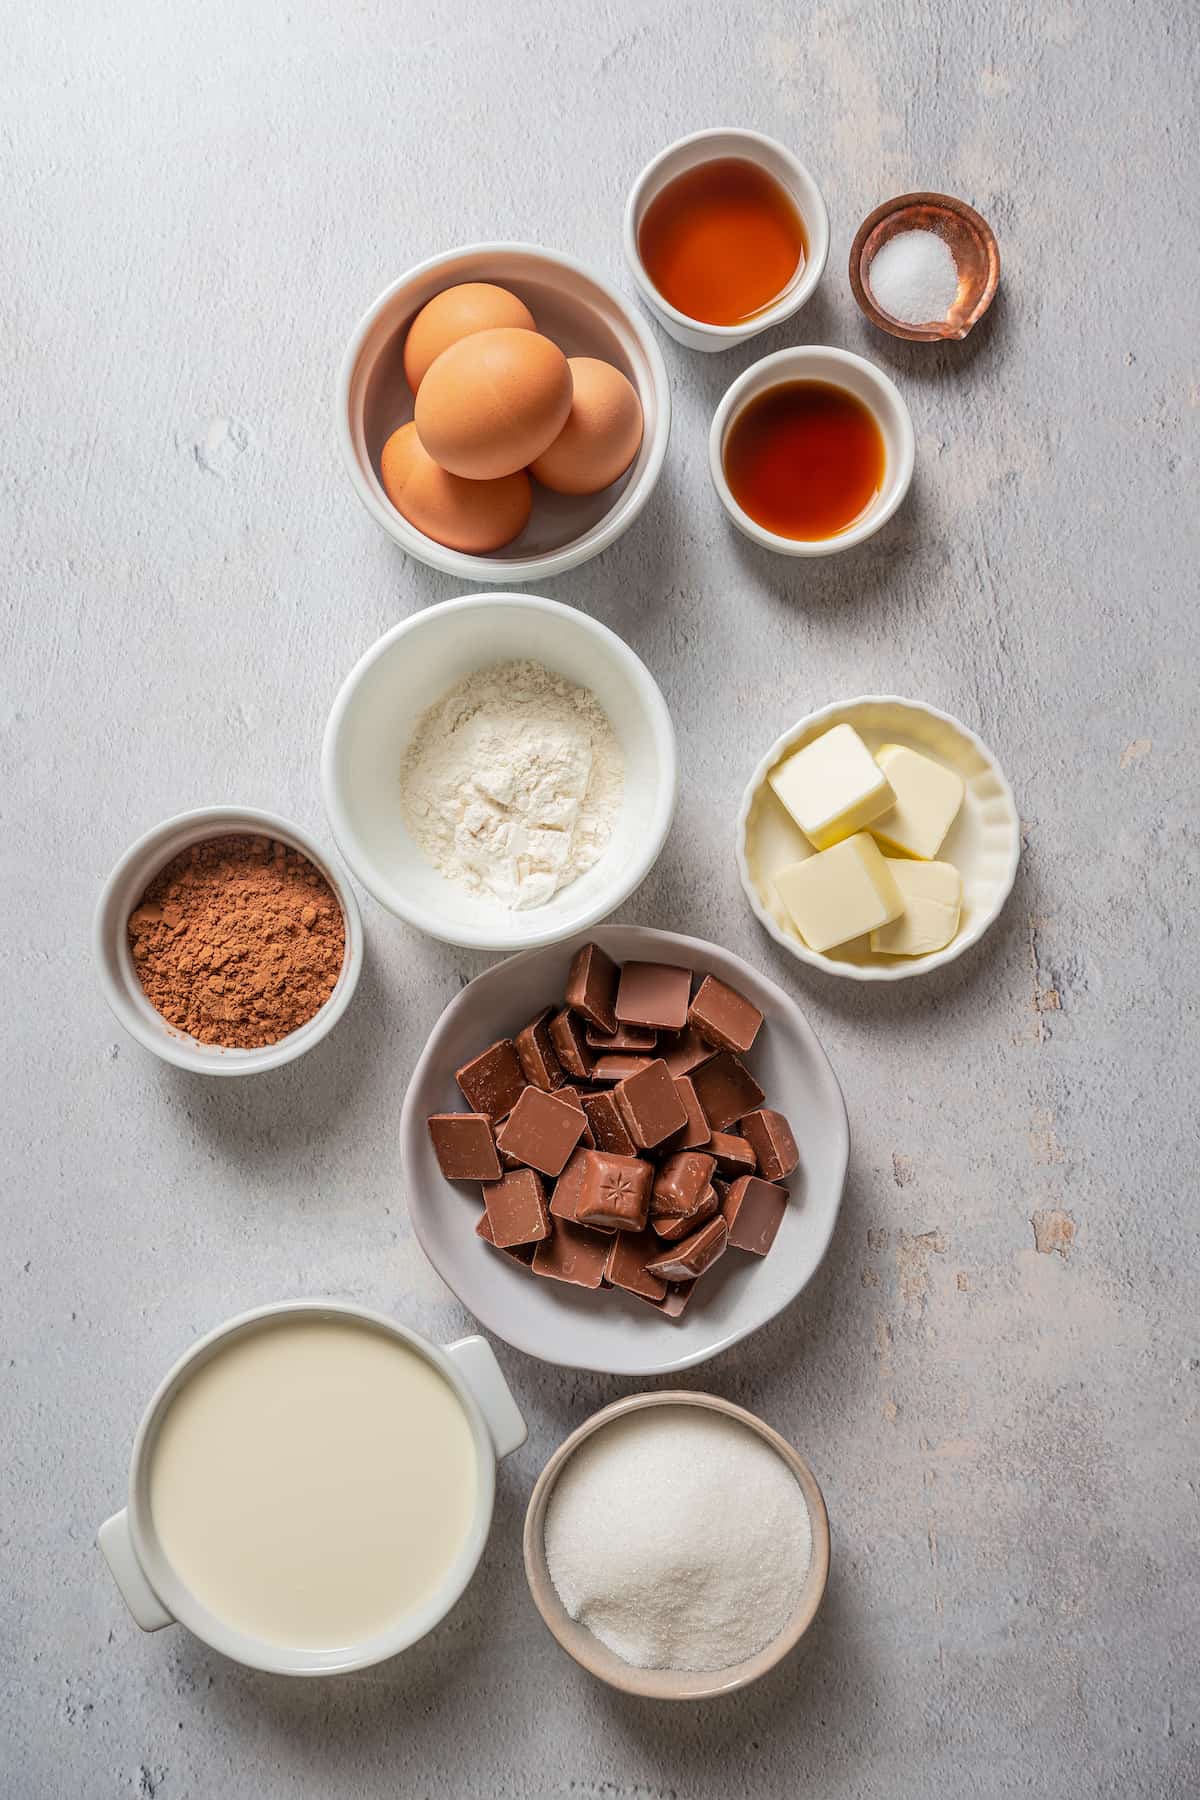 Ingredients for chocolate mousse cake separated into bowls.